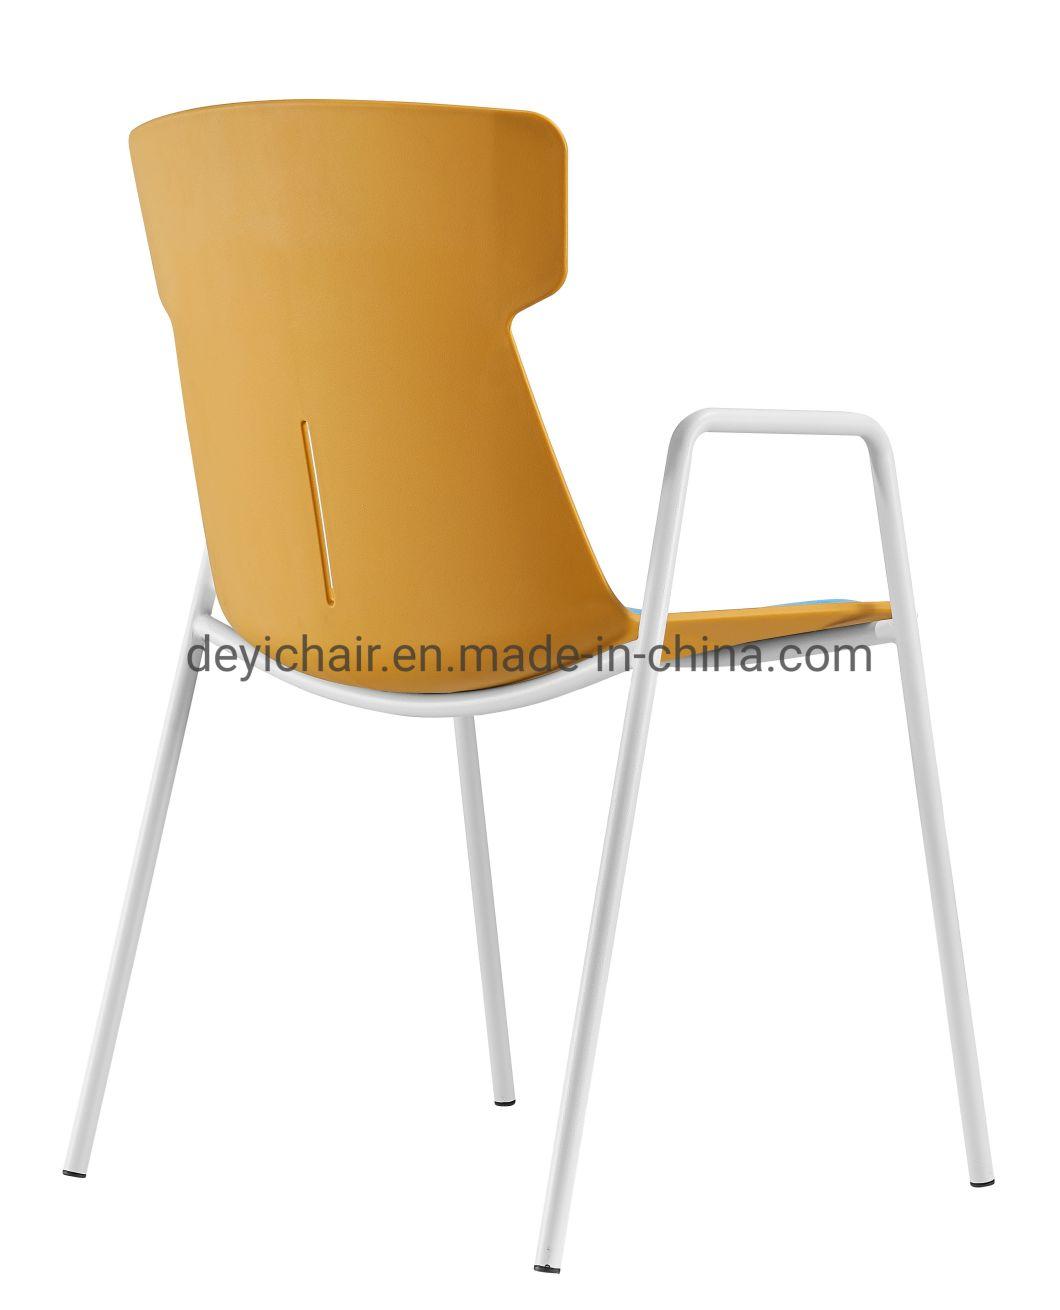 Plastic Shell with Seat Cushionwhite Color Chromed Finished 4 Legs Frame High Stool Chair